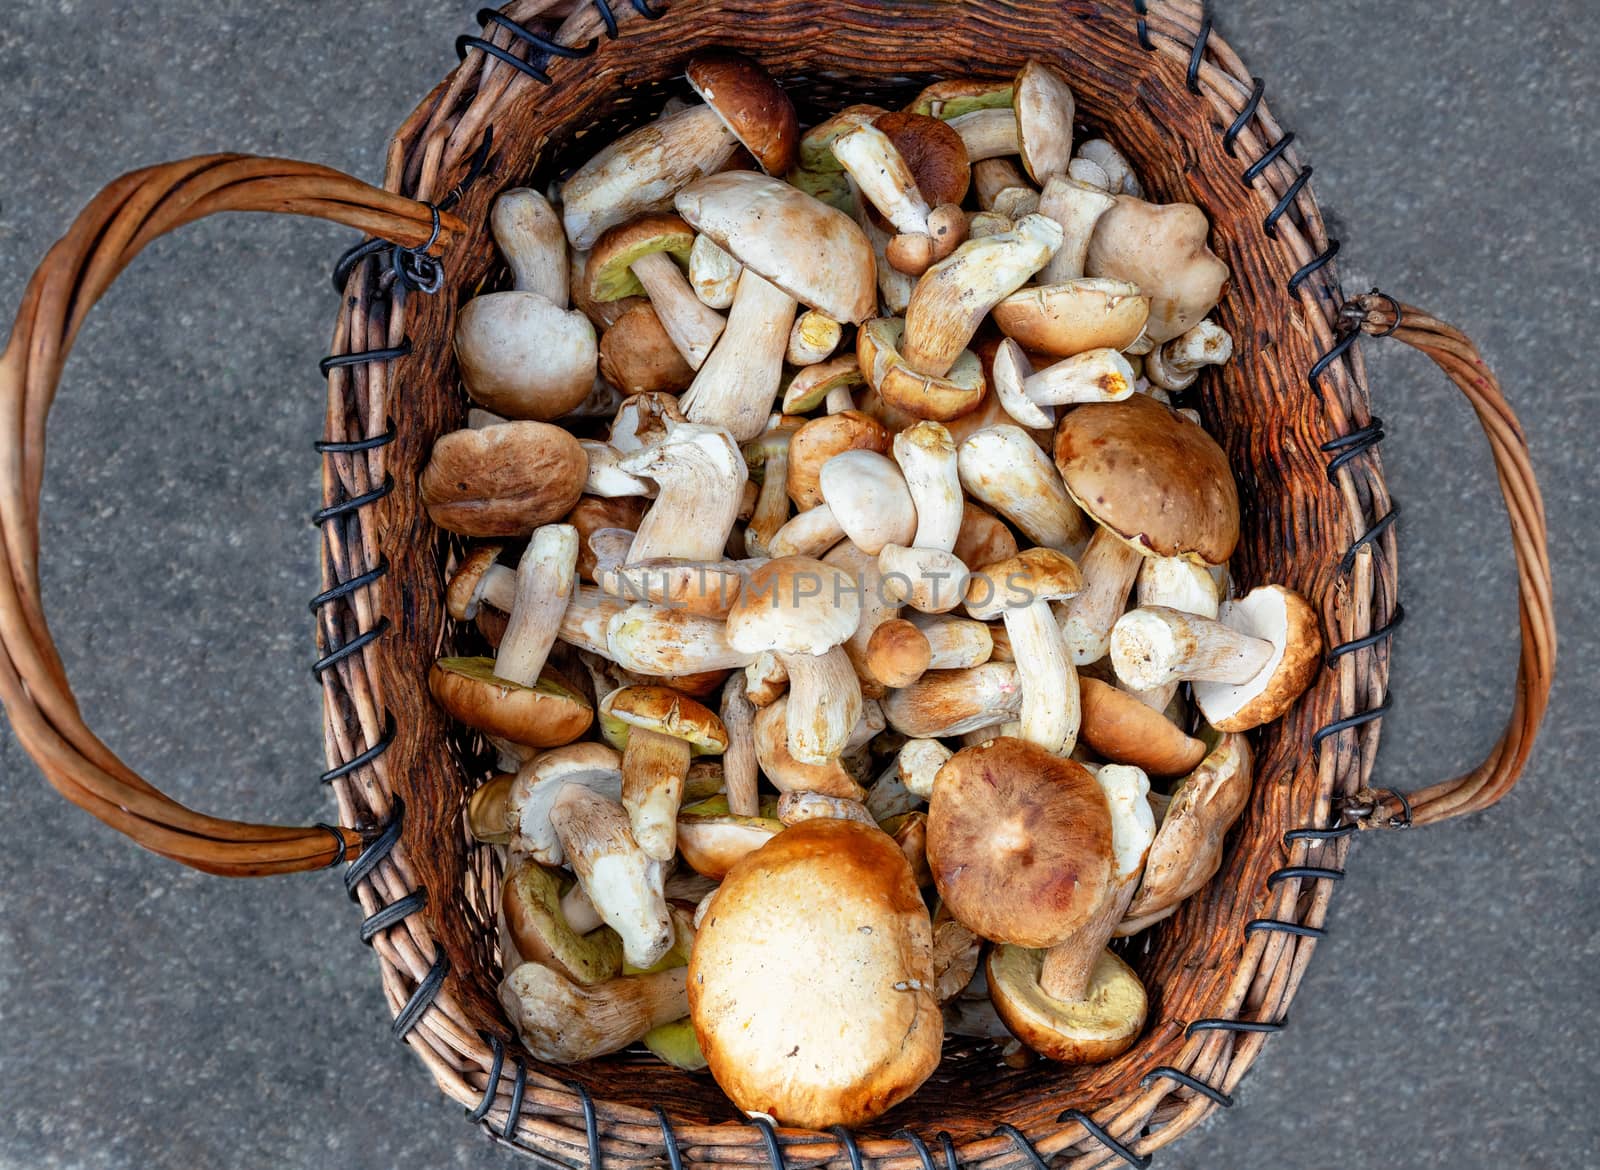 Heap of porcini mushrooms in an old wicker basket Against a background of gray asphalt. by Sergii